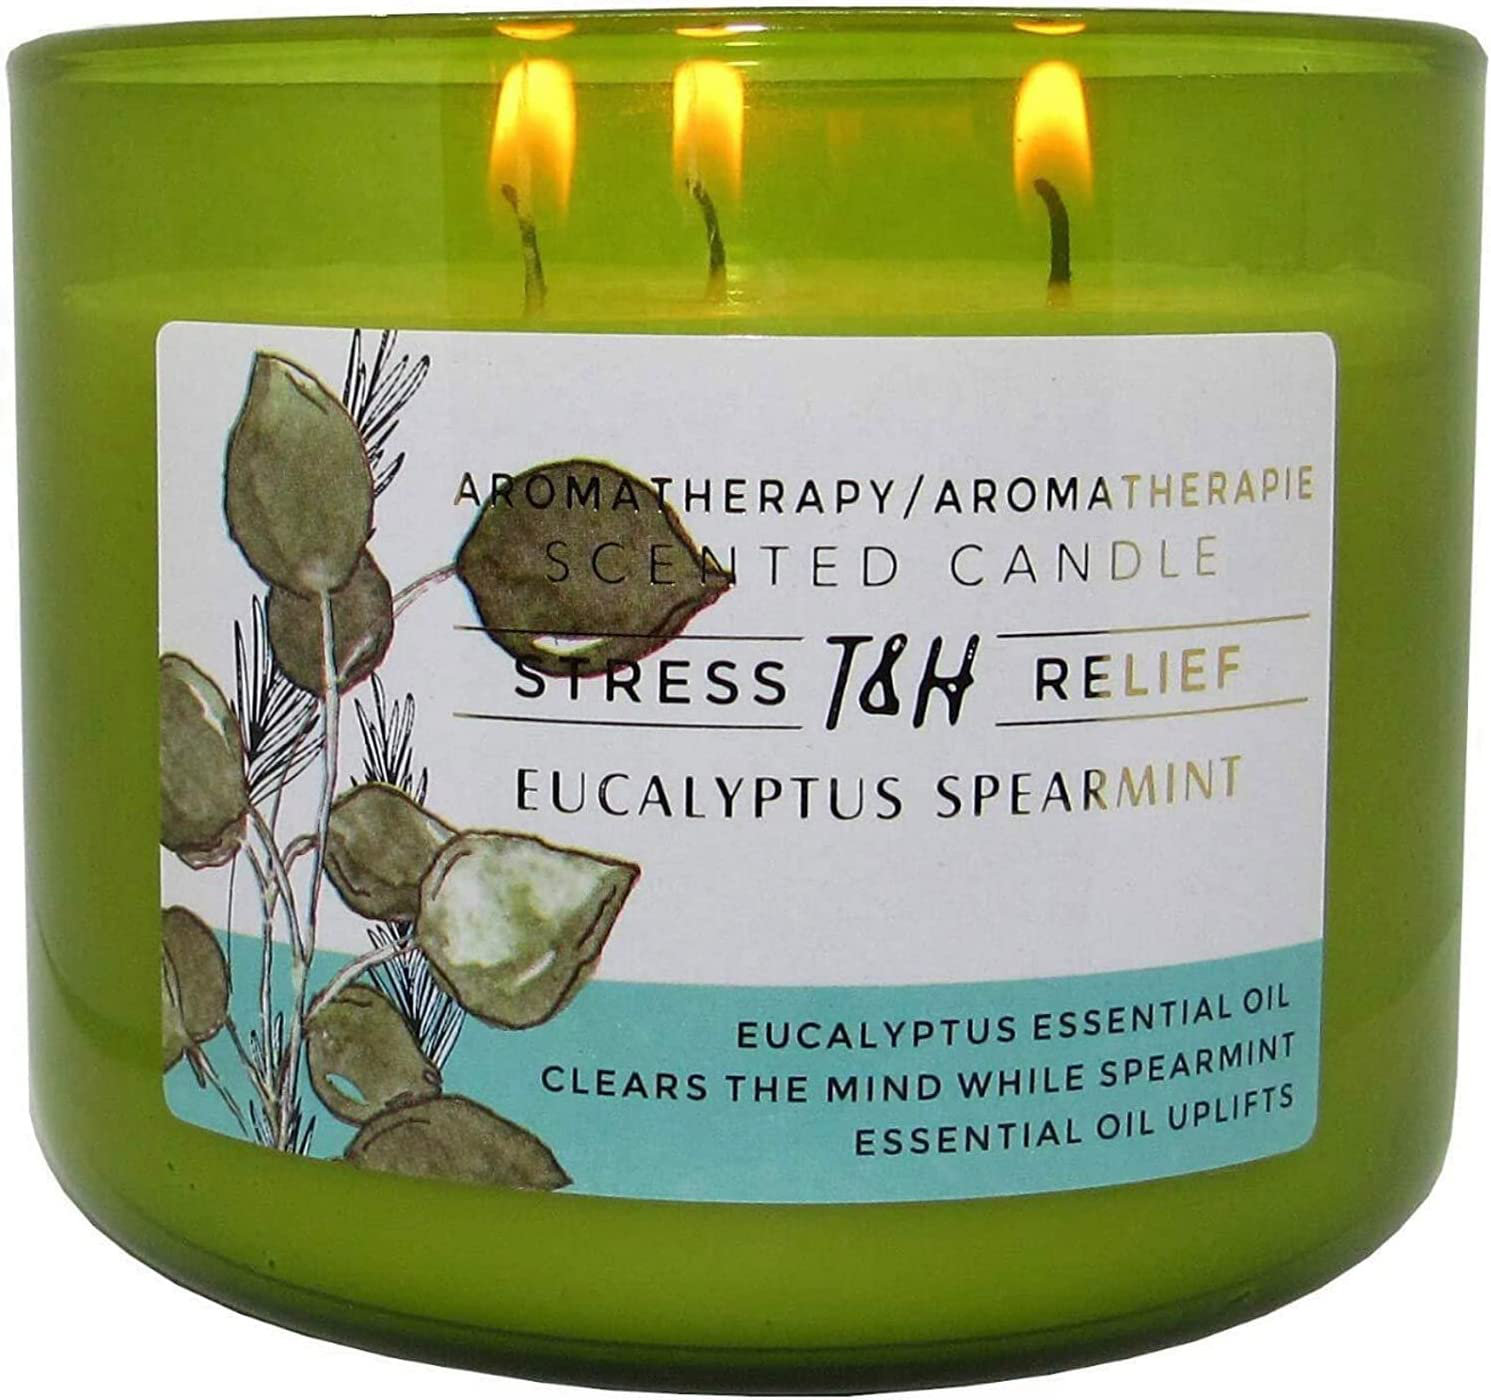 Eucalyptus Spearmint Wood Wick Candle Crackling Candle Scented